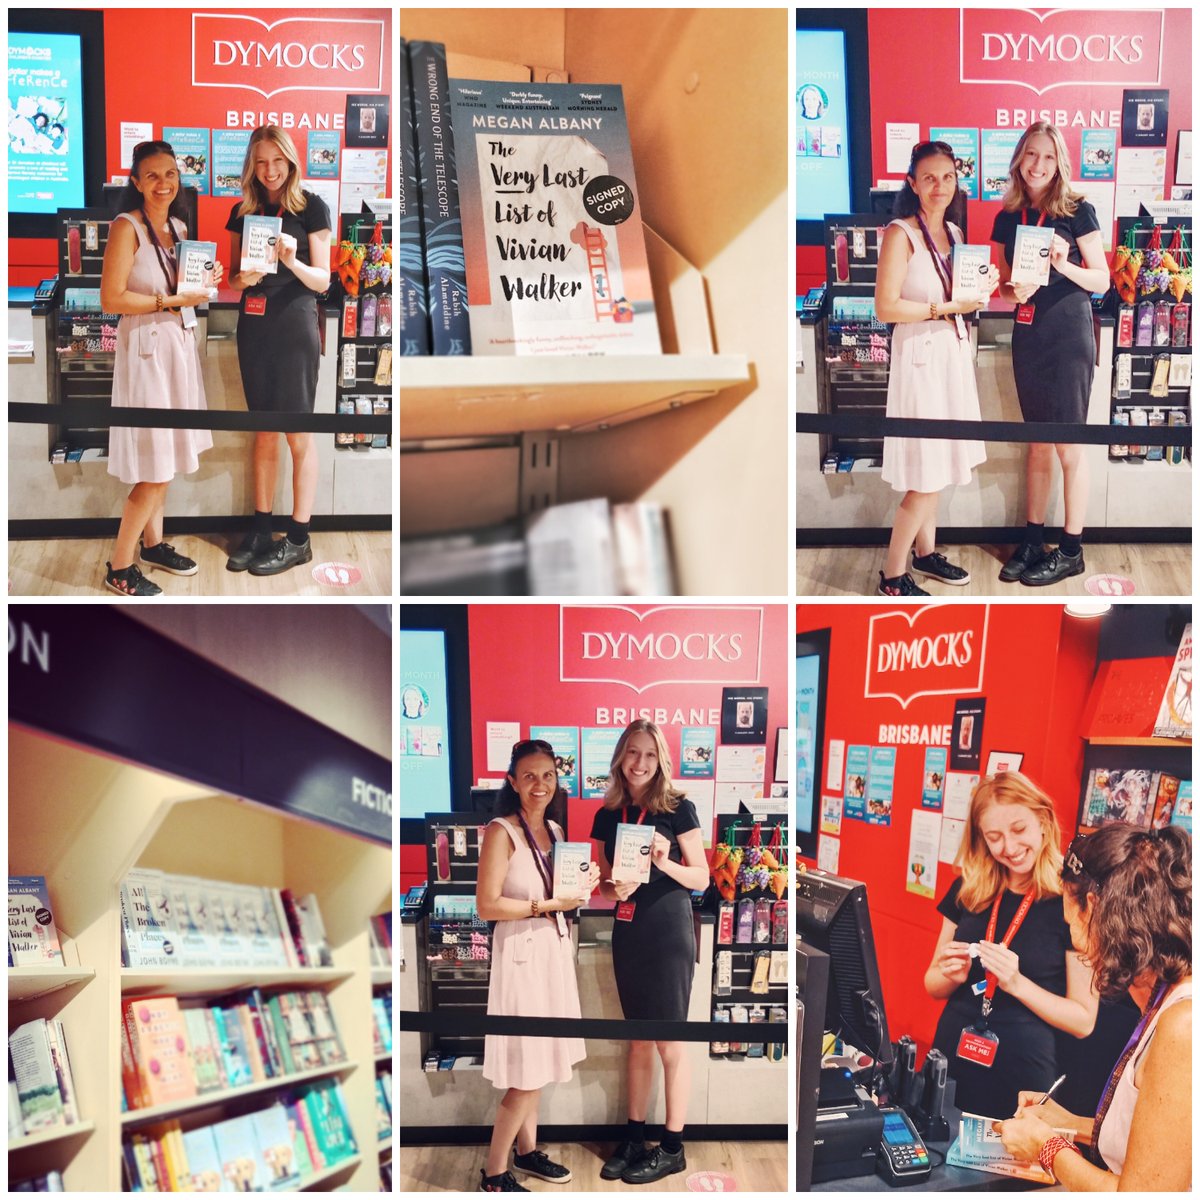 Dropped into Dymocks, Queen St, Brisbane to sign a few copies of my book and to thank the wonderful staff for all their support. So....if you're in BrisVegas, you know where to get your personally signed copies!

#Dymocks #theverylastlistofvivianwalker #meganalbanywriter